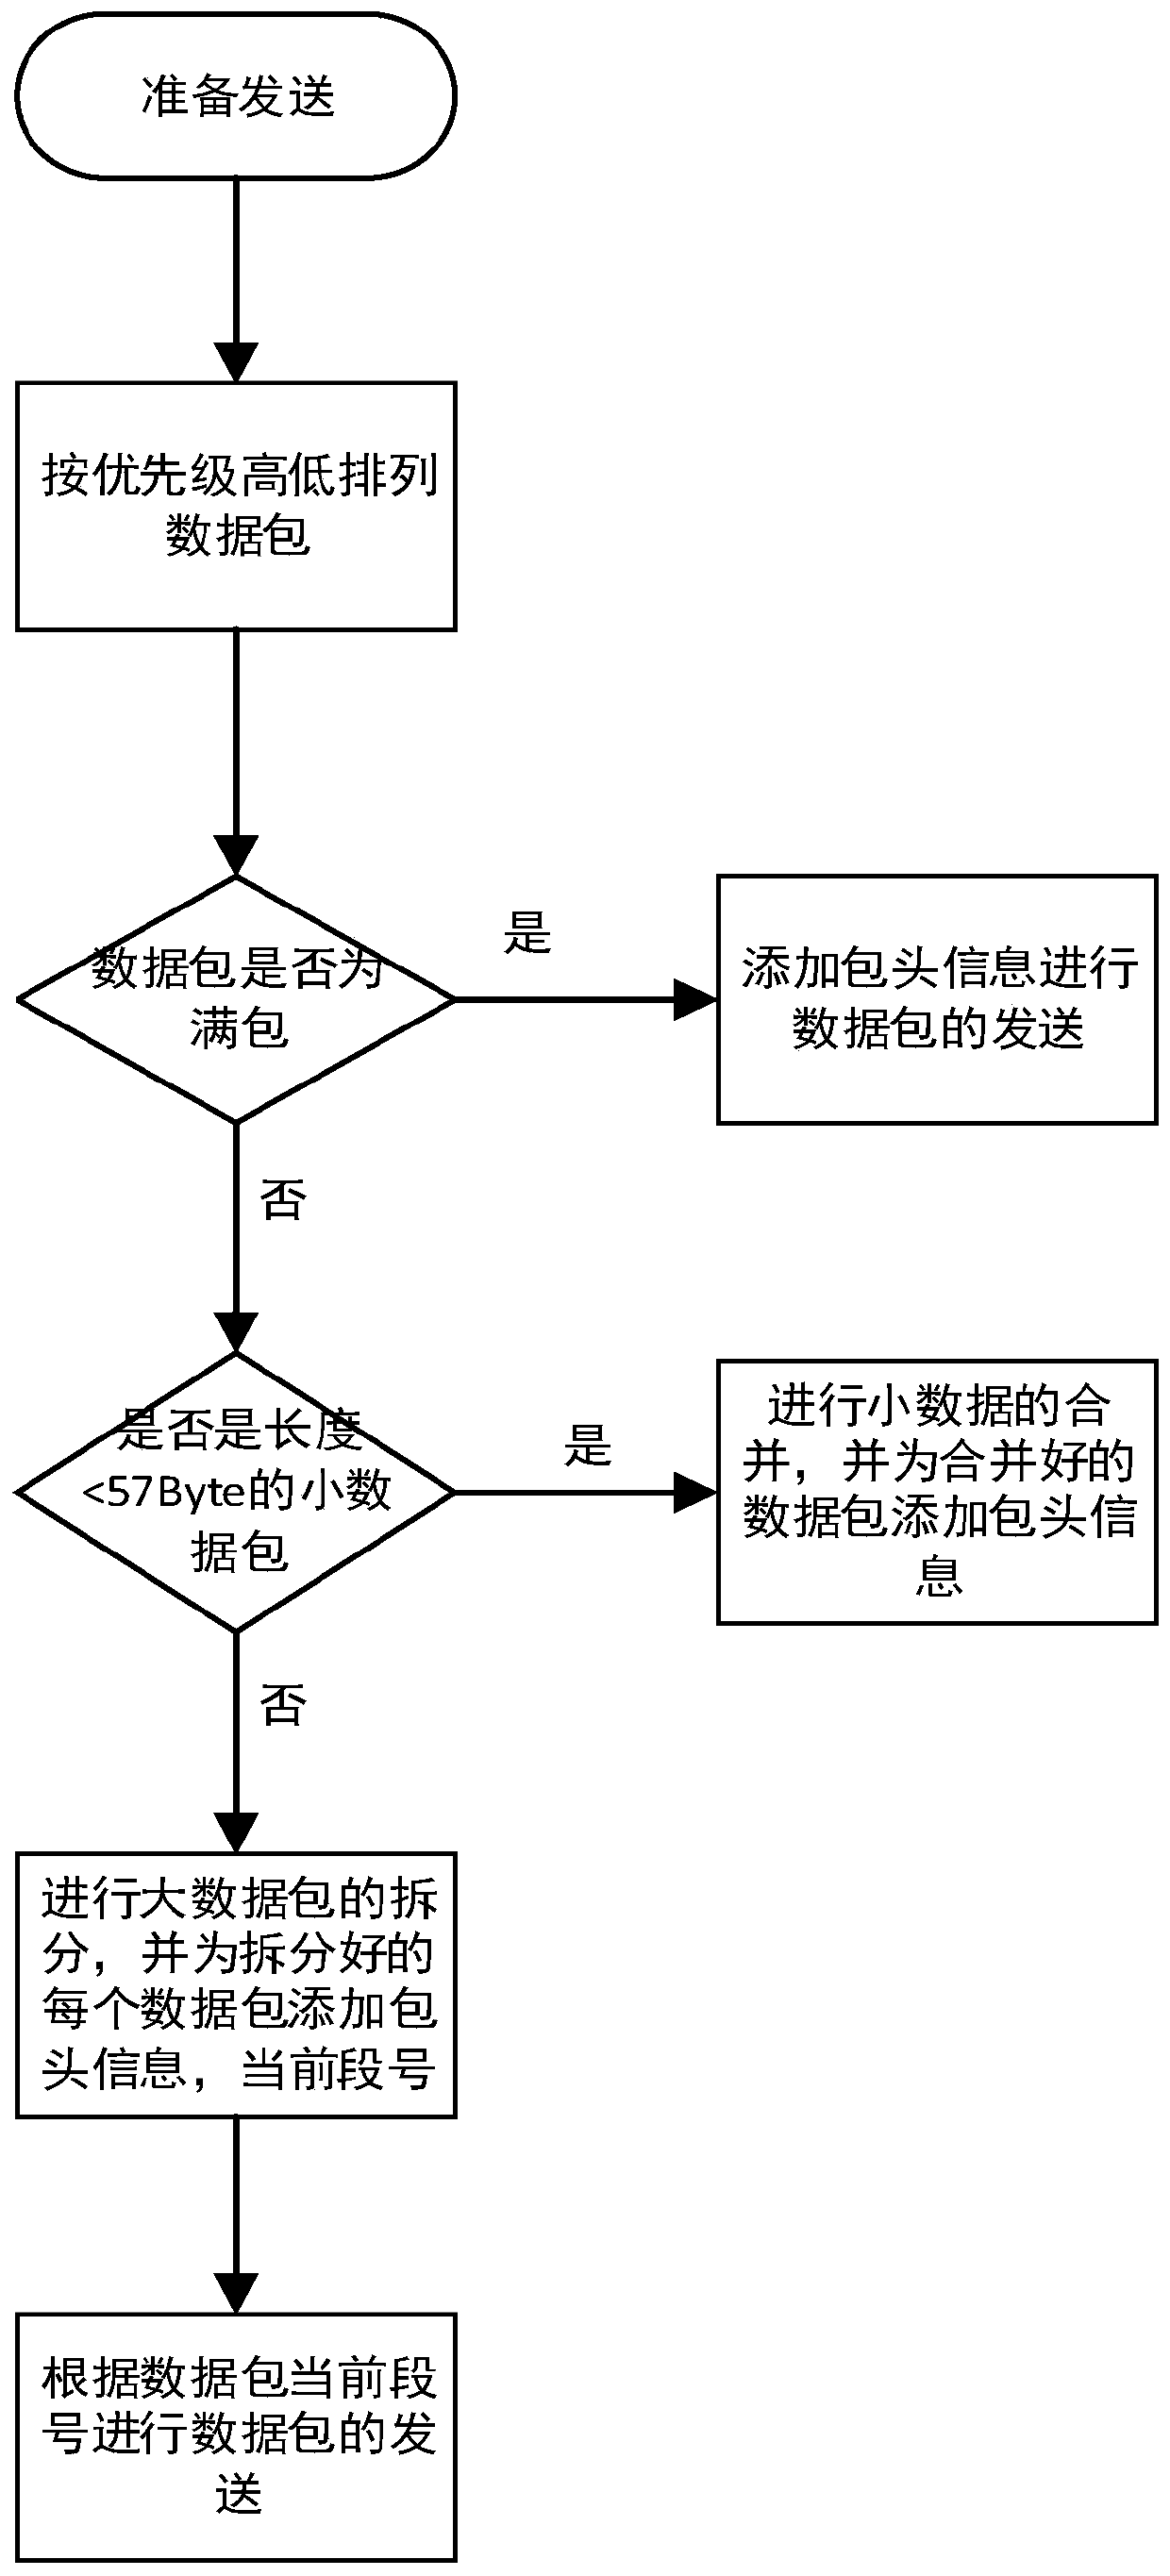 A Beidou short message communication method for a satellite remote education system